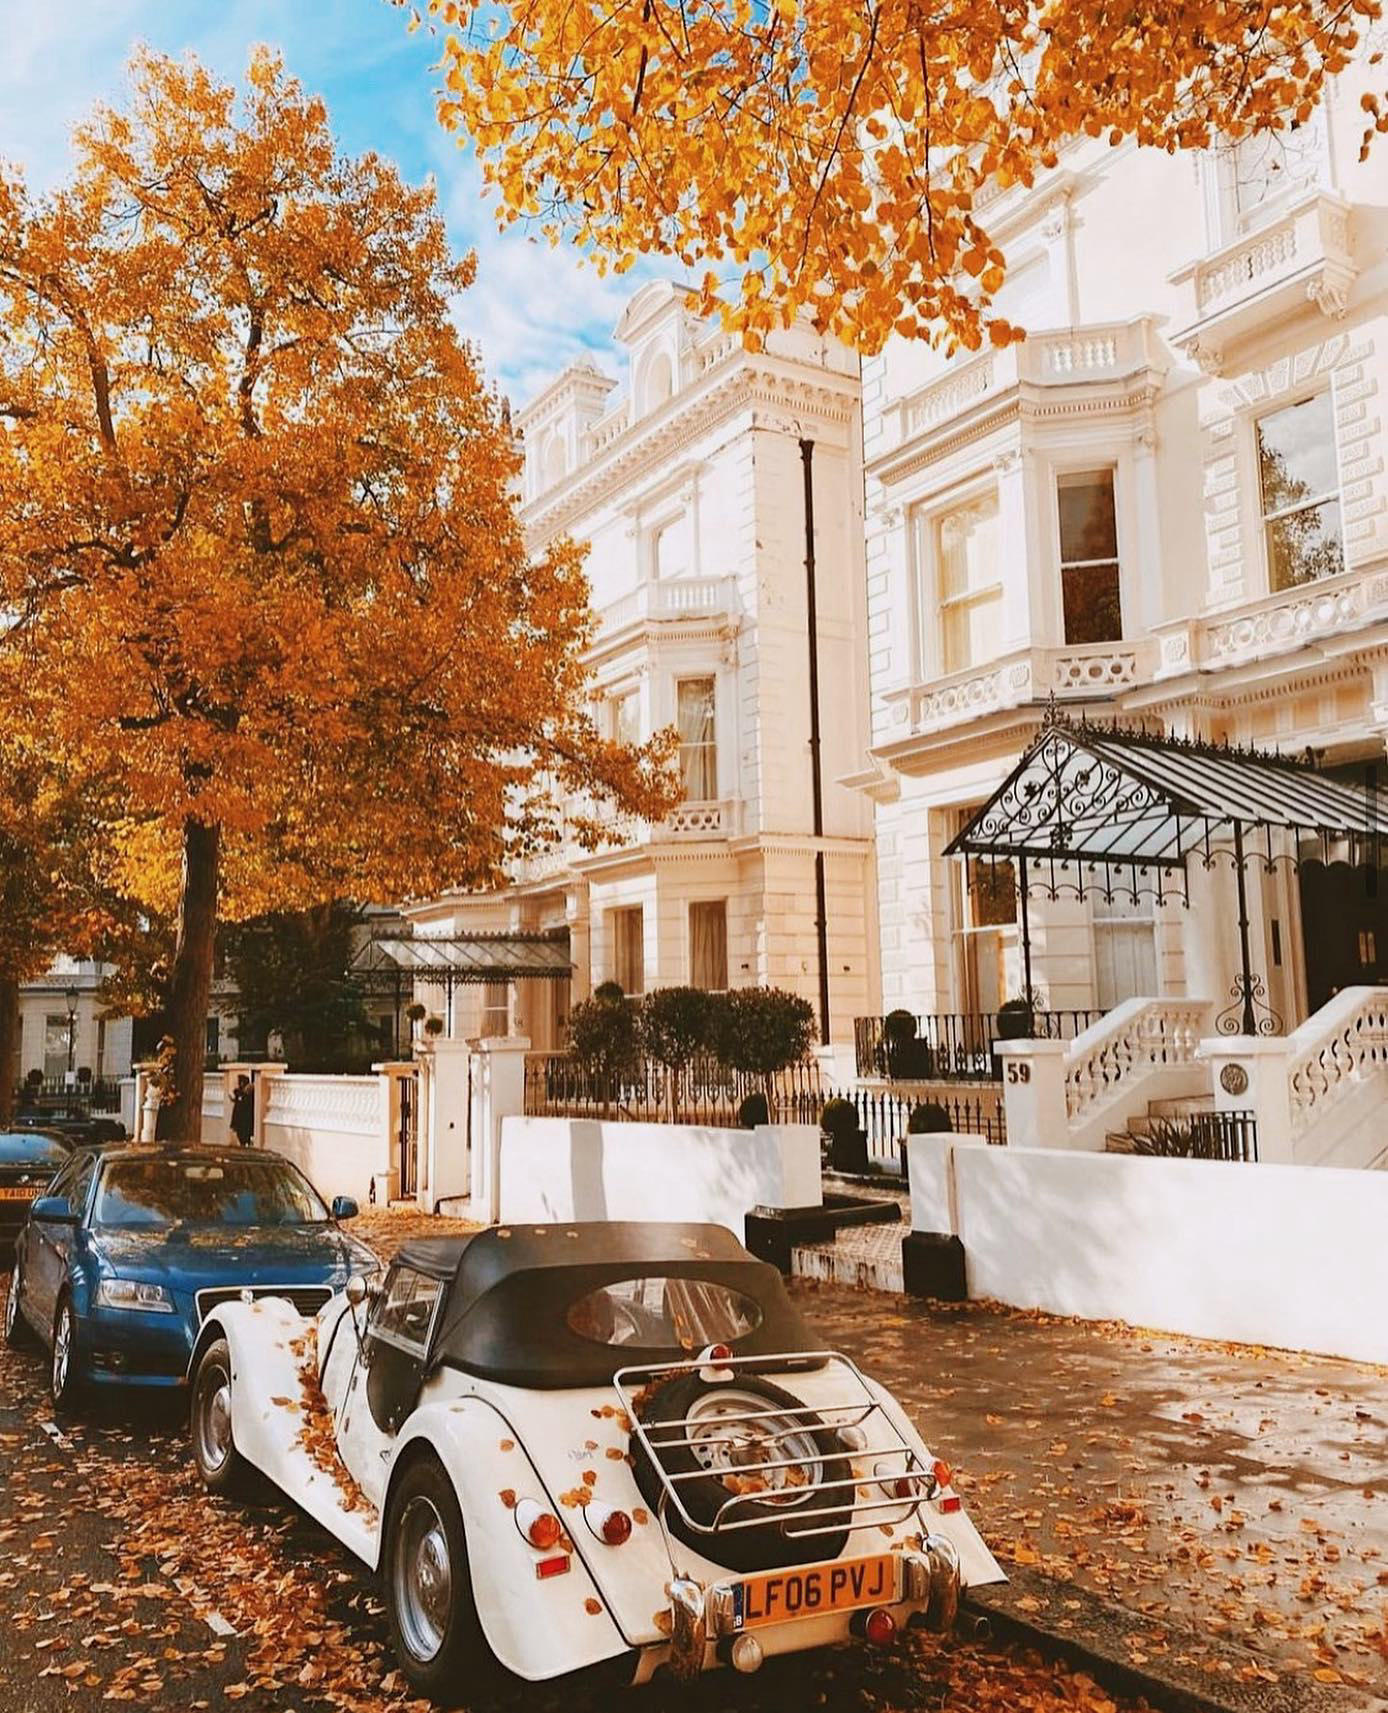 image  1 Royal Lancaster London - Luxury Hotel - Autumn is such a beautiful time to explore the city